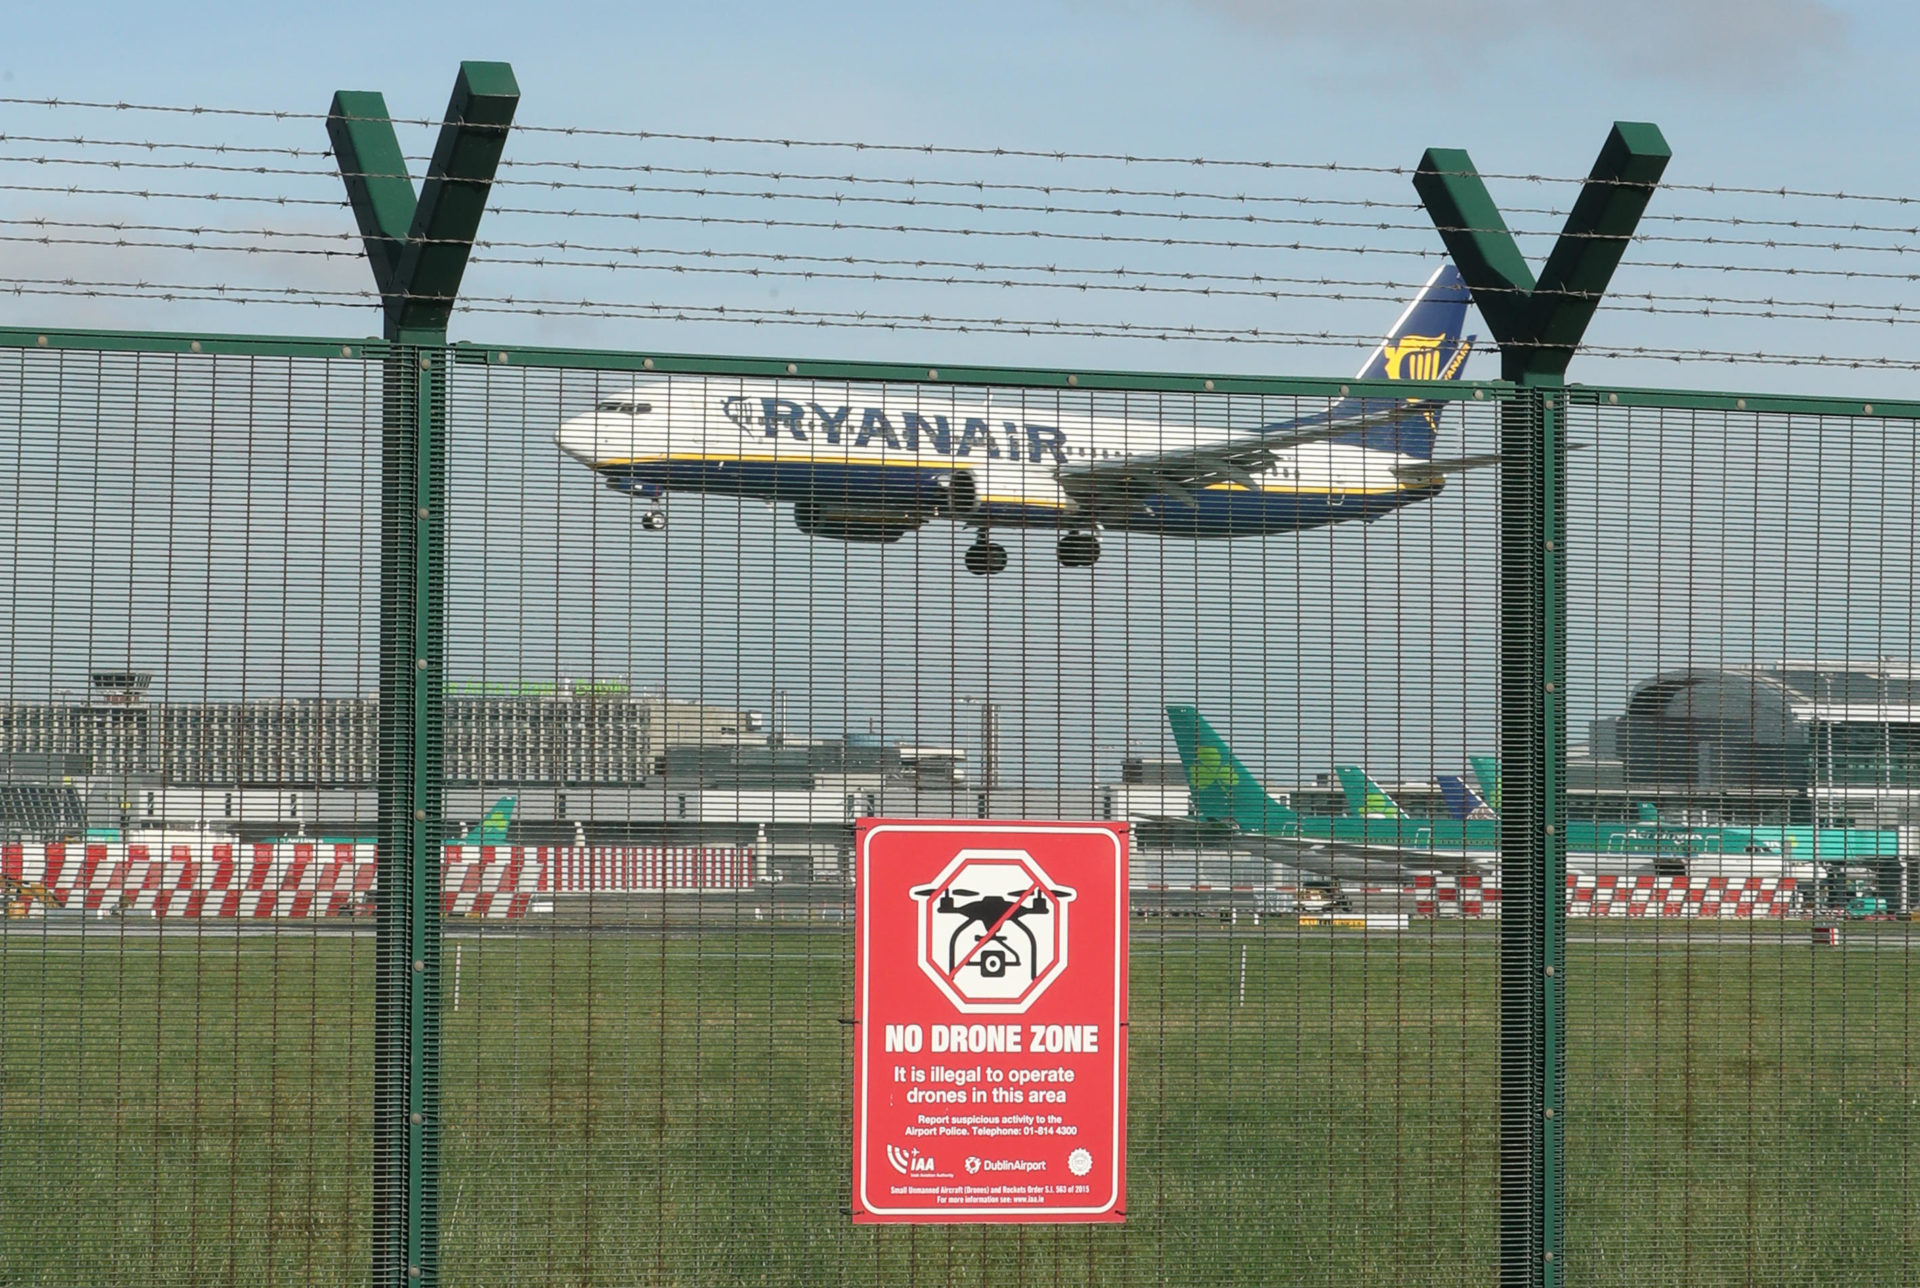 A ‘No Drone Zone’ sign at Dublin Airport. Image: PA Images / Alamy